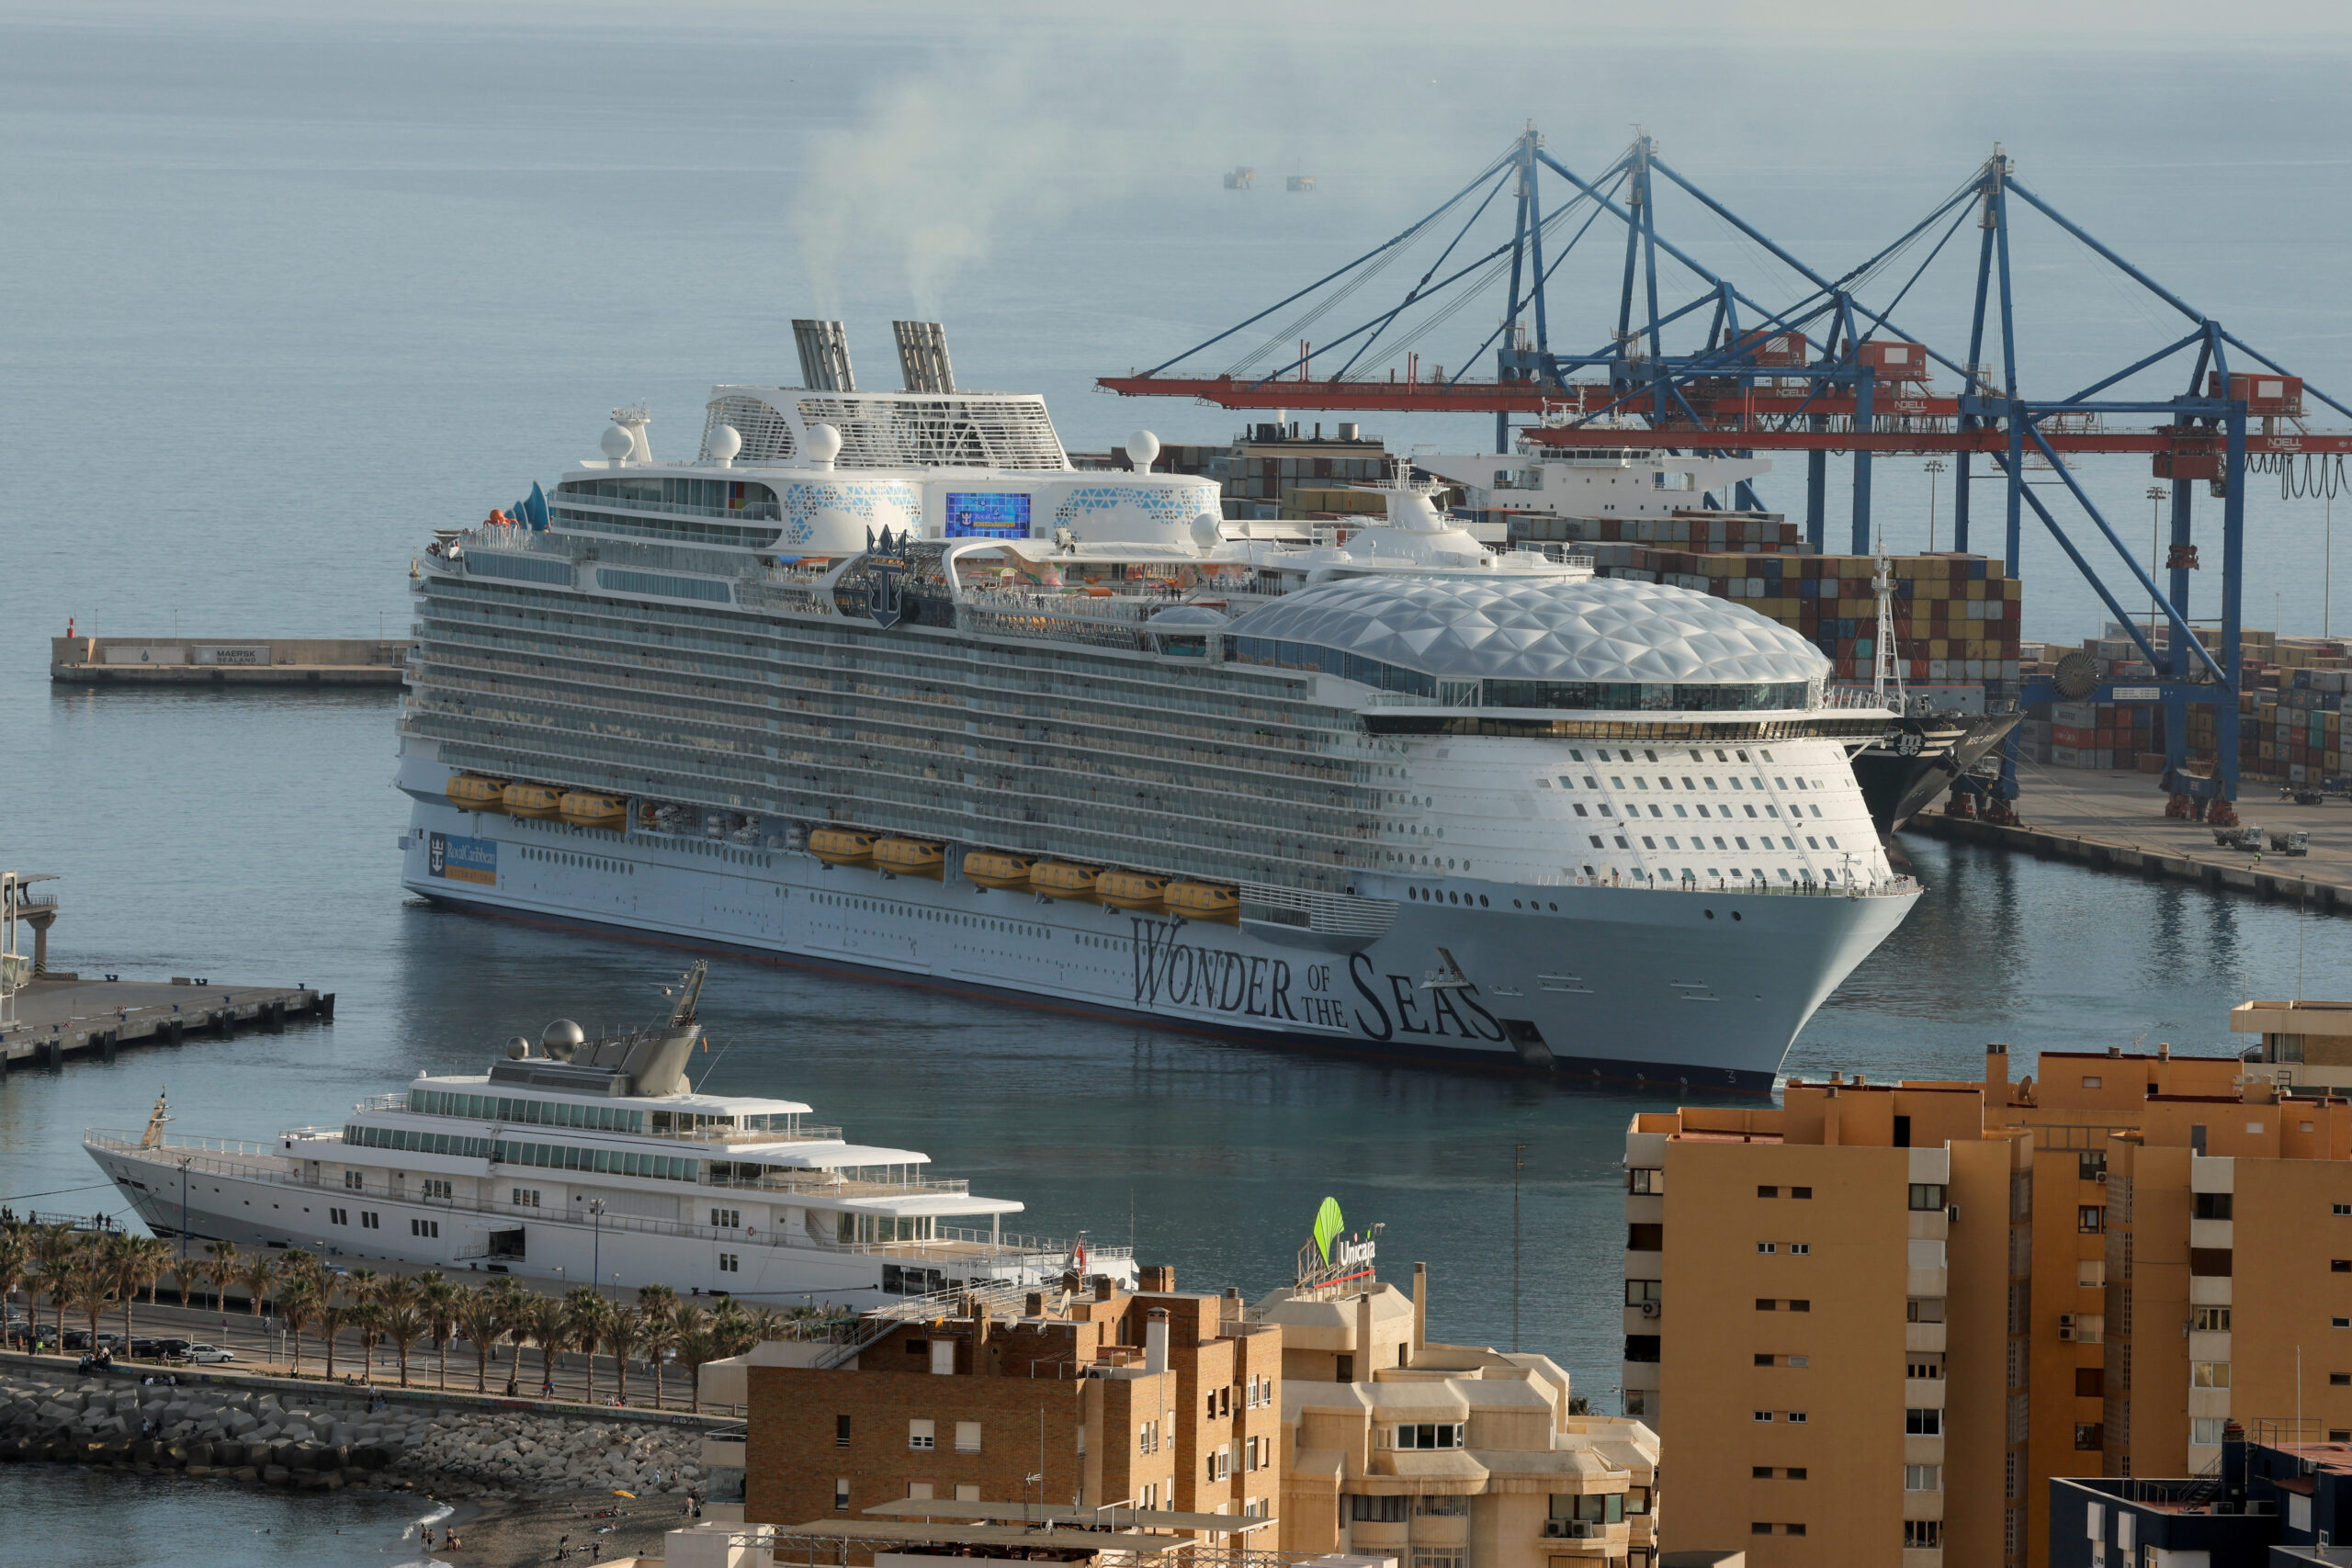 The 'Wonder of the Seas' cruise ship leaves a port in Malaga. REUTERS/Jon Nazca